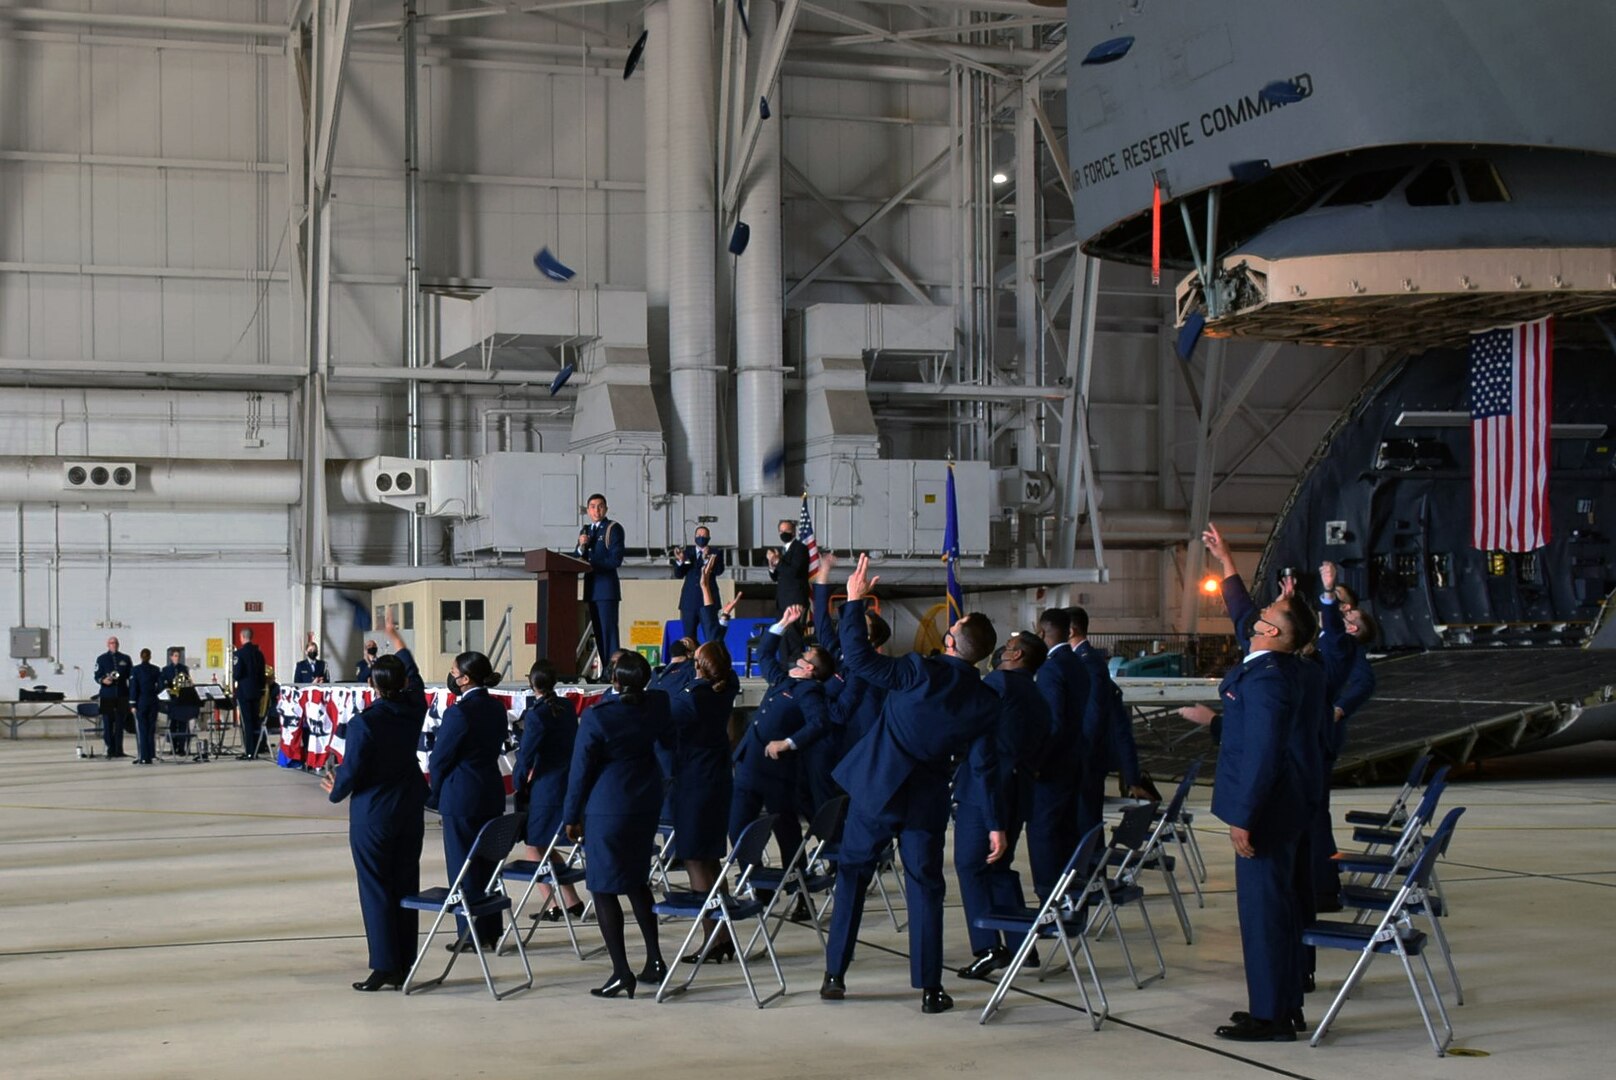 Newly commissioned second lieutenants toss their flight caps into the air in celebration at Joint Base San Antonio-Lackland, Texas on May 14, 2021.